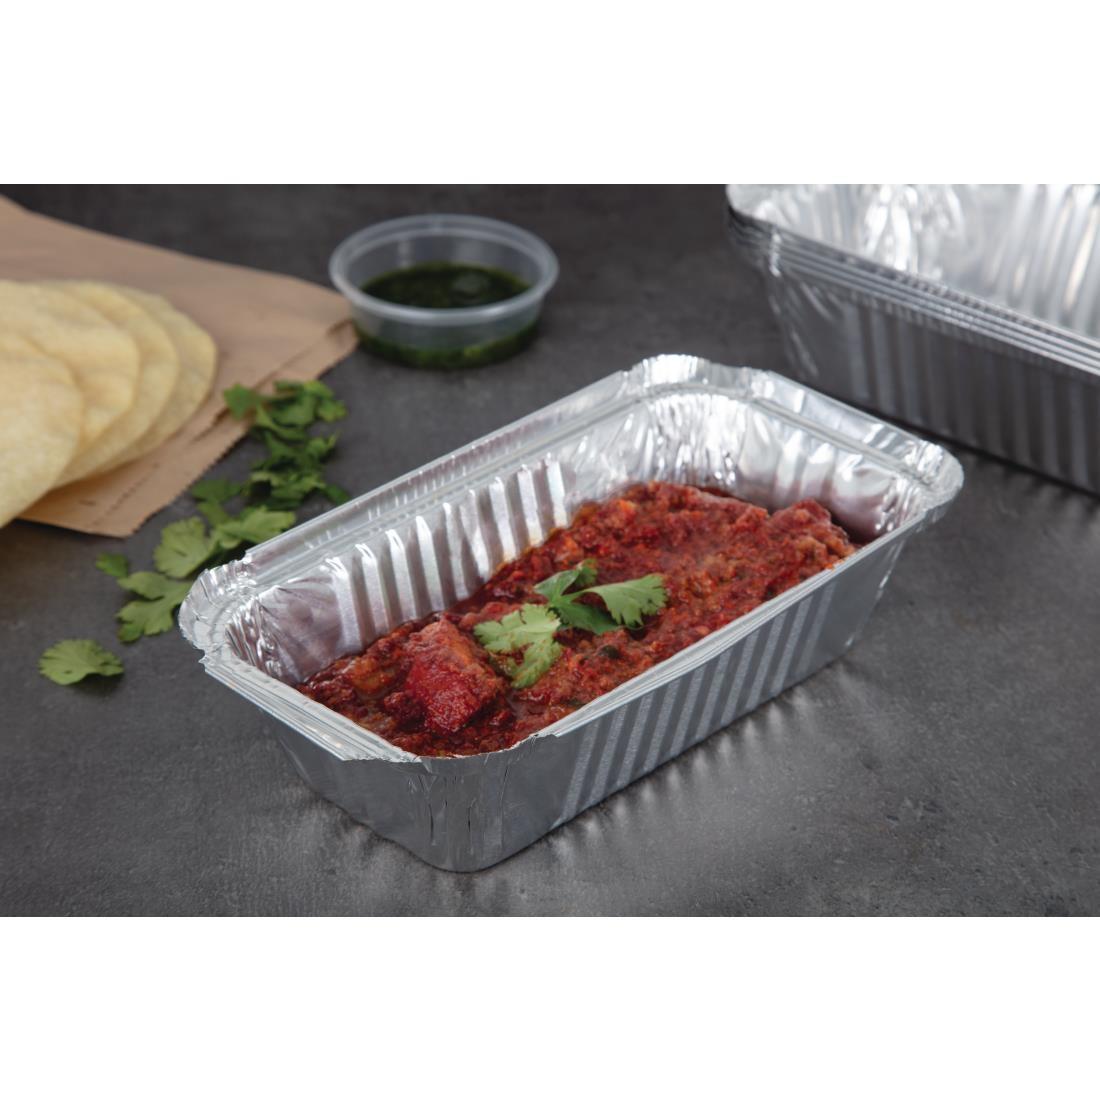 Fiesta Recyclable Foil Containers Large 688ml / 24oz (Pack of 500) - CD951  - 6